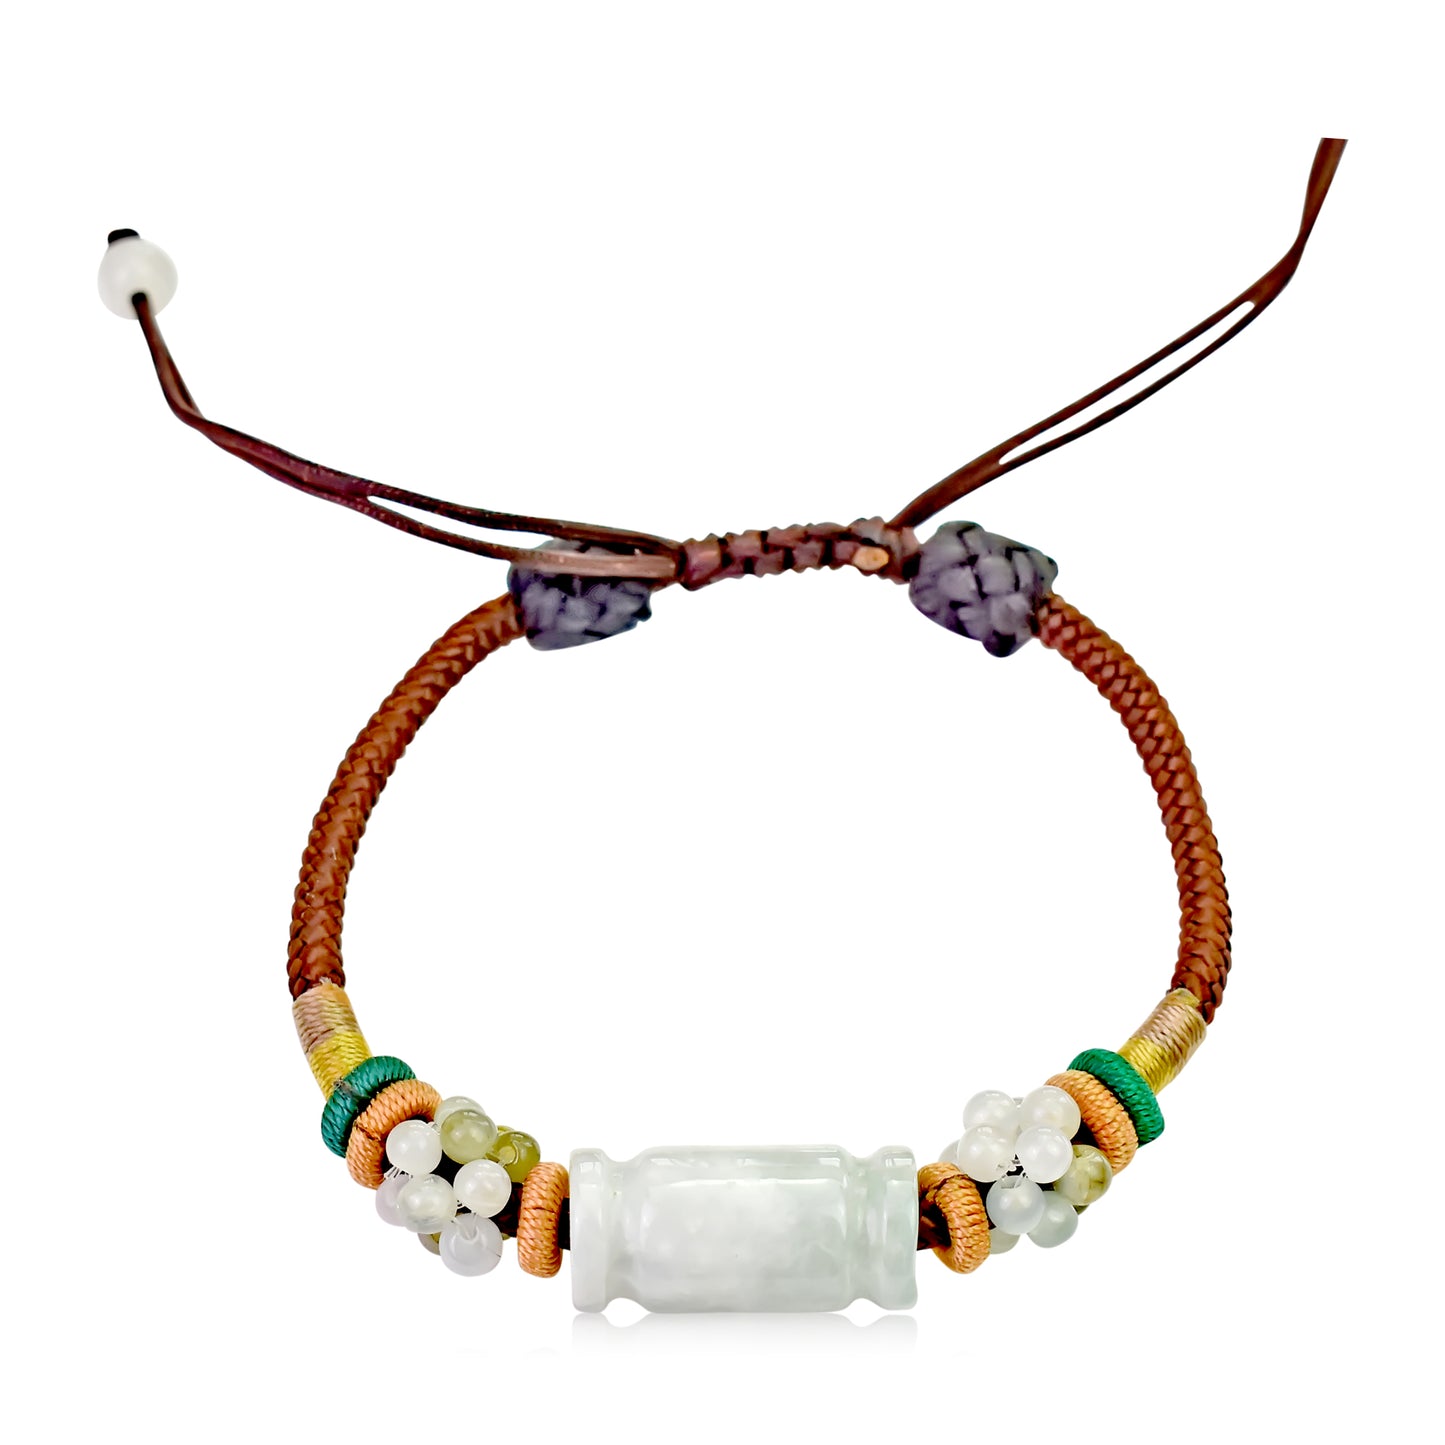 Wear a Vibrant Charm Bracelet Every Day with this Jade Bracelet